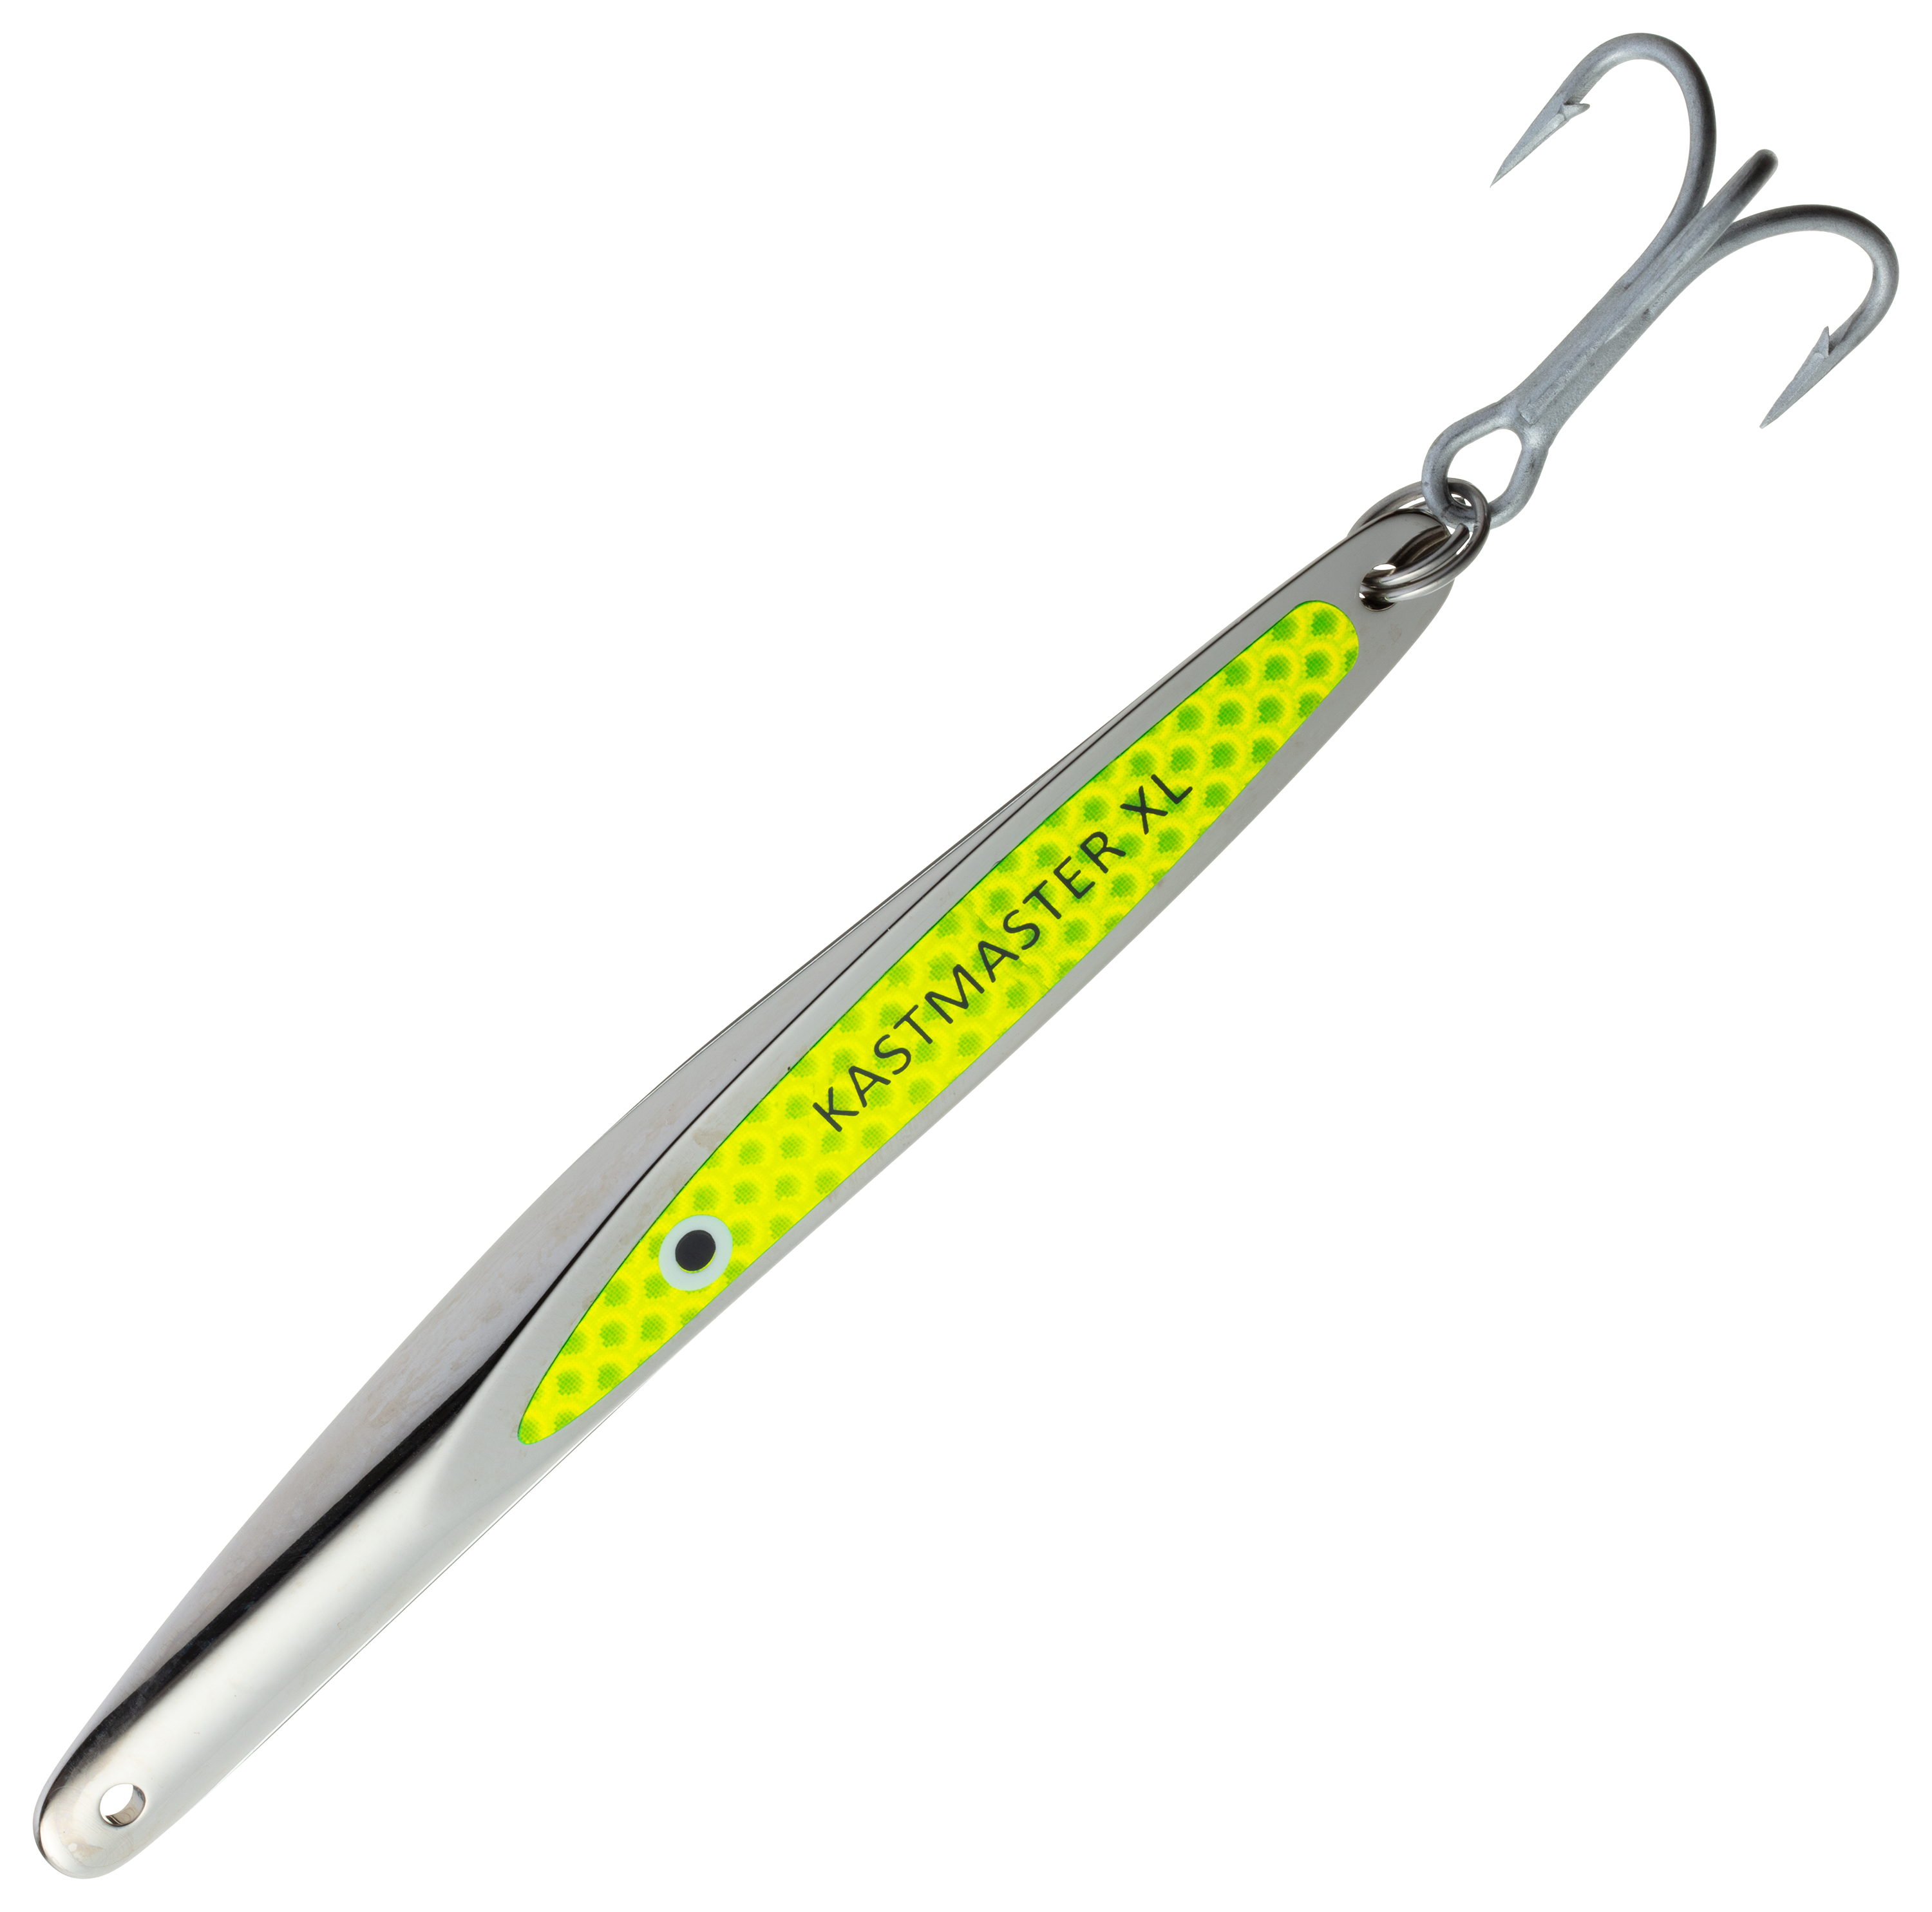 Acme Kastmaster XL Fishing Lure, Silver/Blue, 4.5-Inch